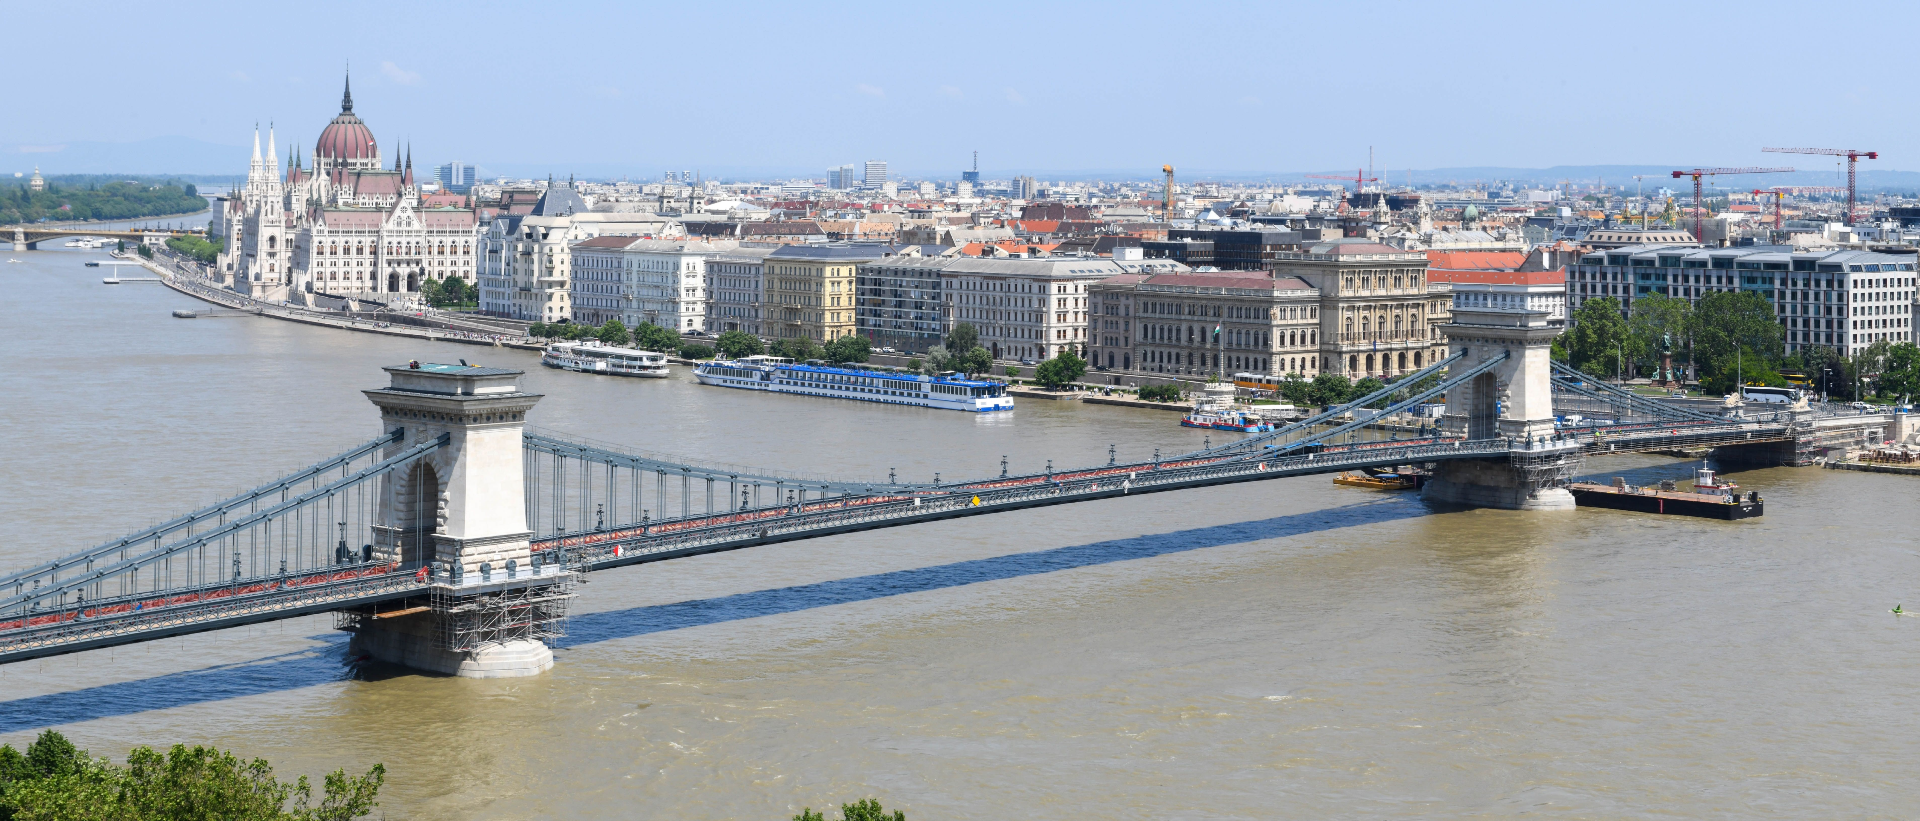 Inauguration of the Renovated Chain Bridge Coming on Friday